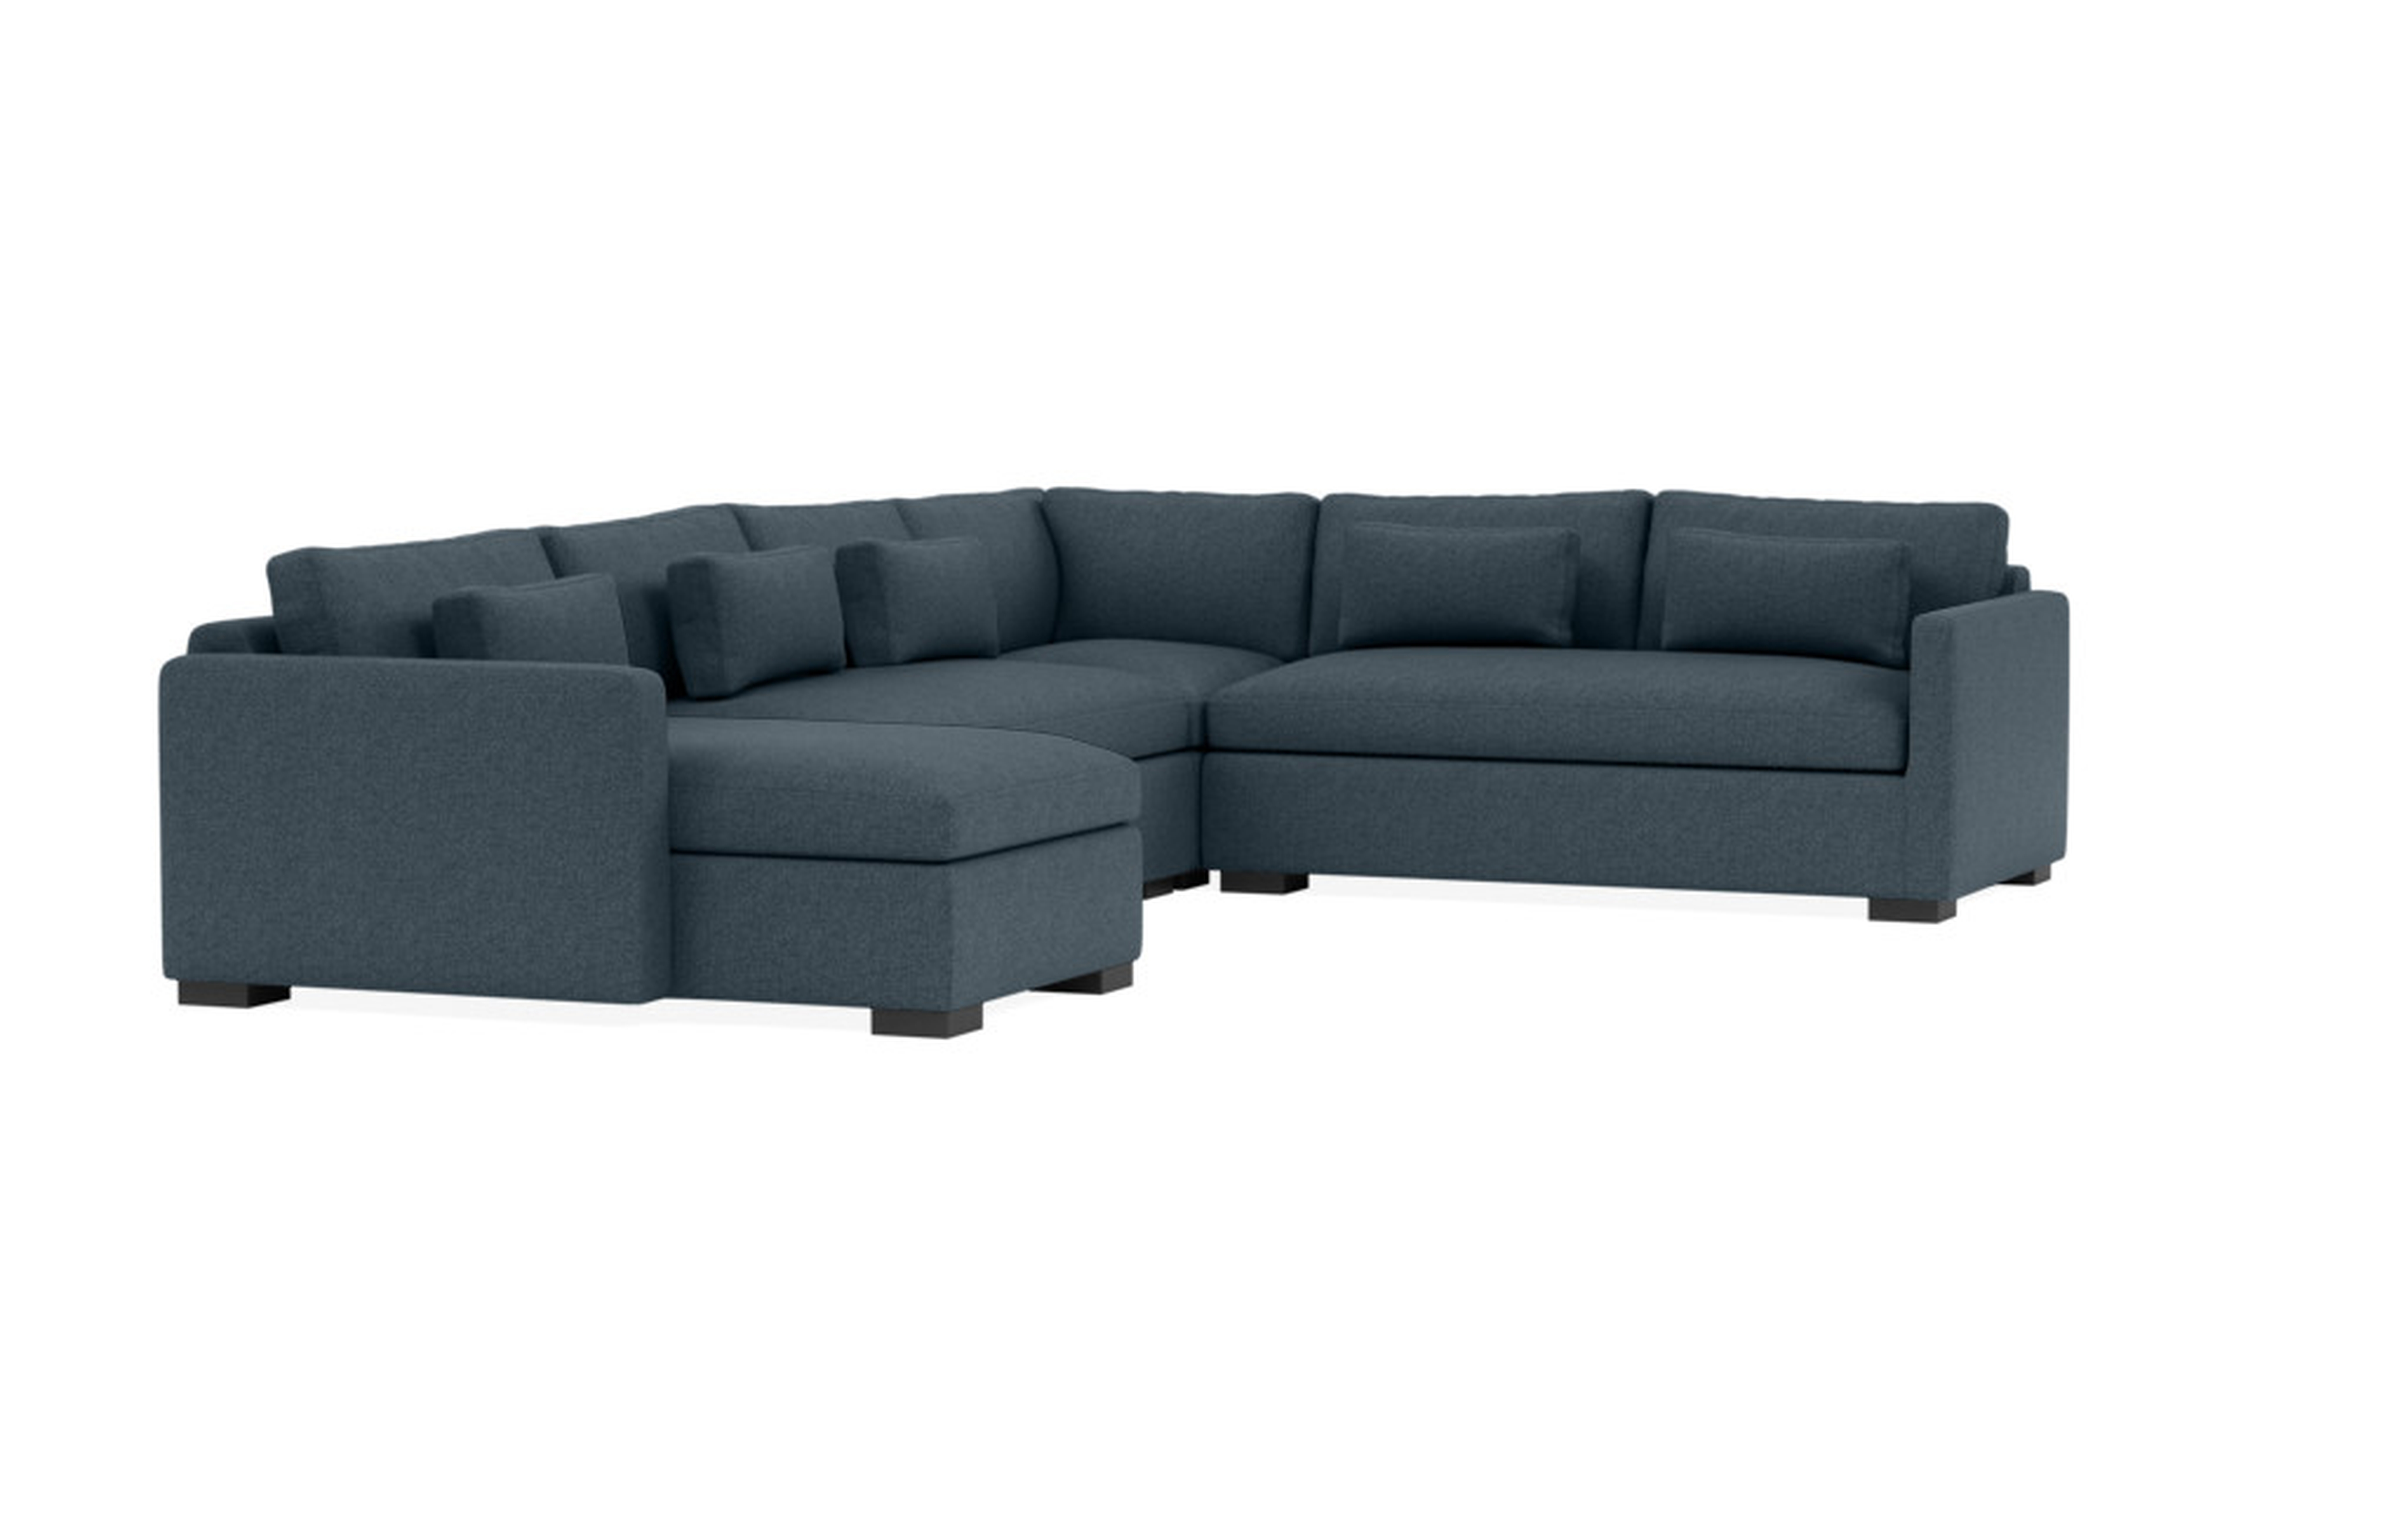 CHARLY Corner Sectional with Left Chaise 143"L x 108" / Indigo + Painted Black Block Leg - Interior Define